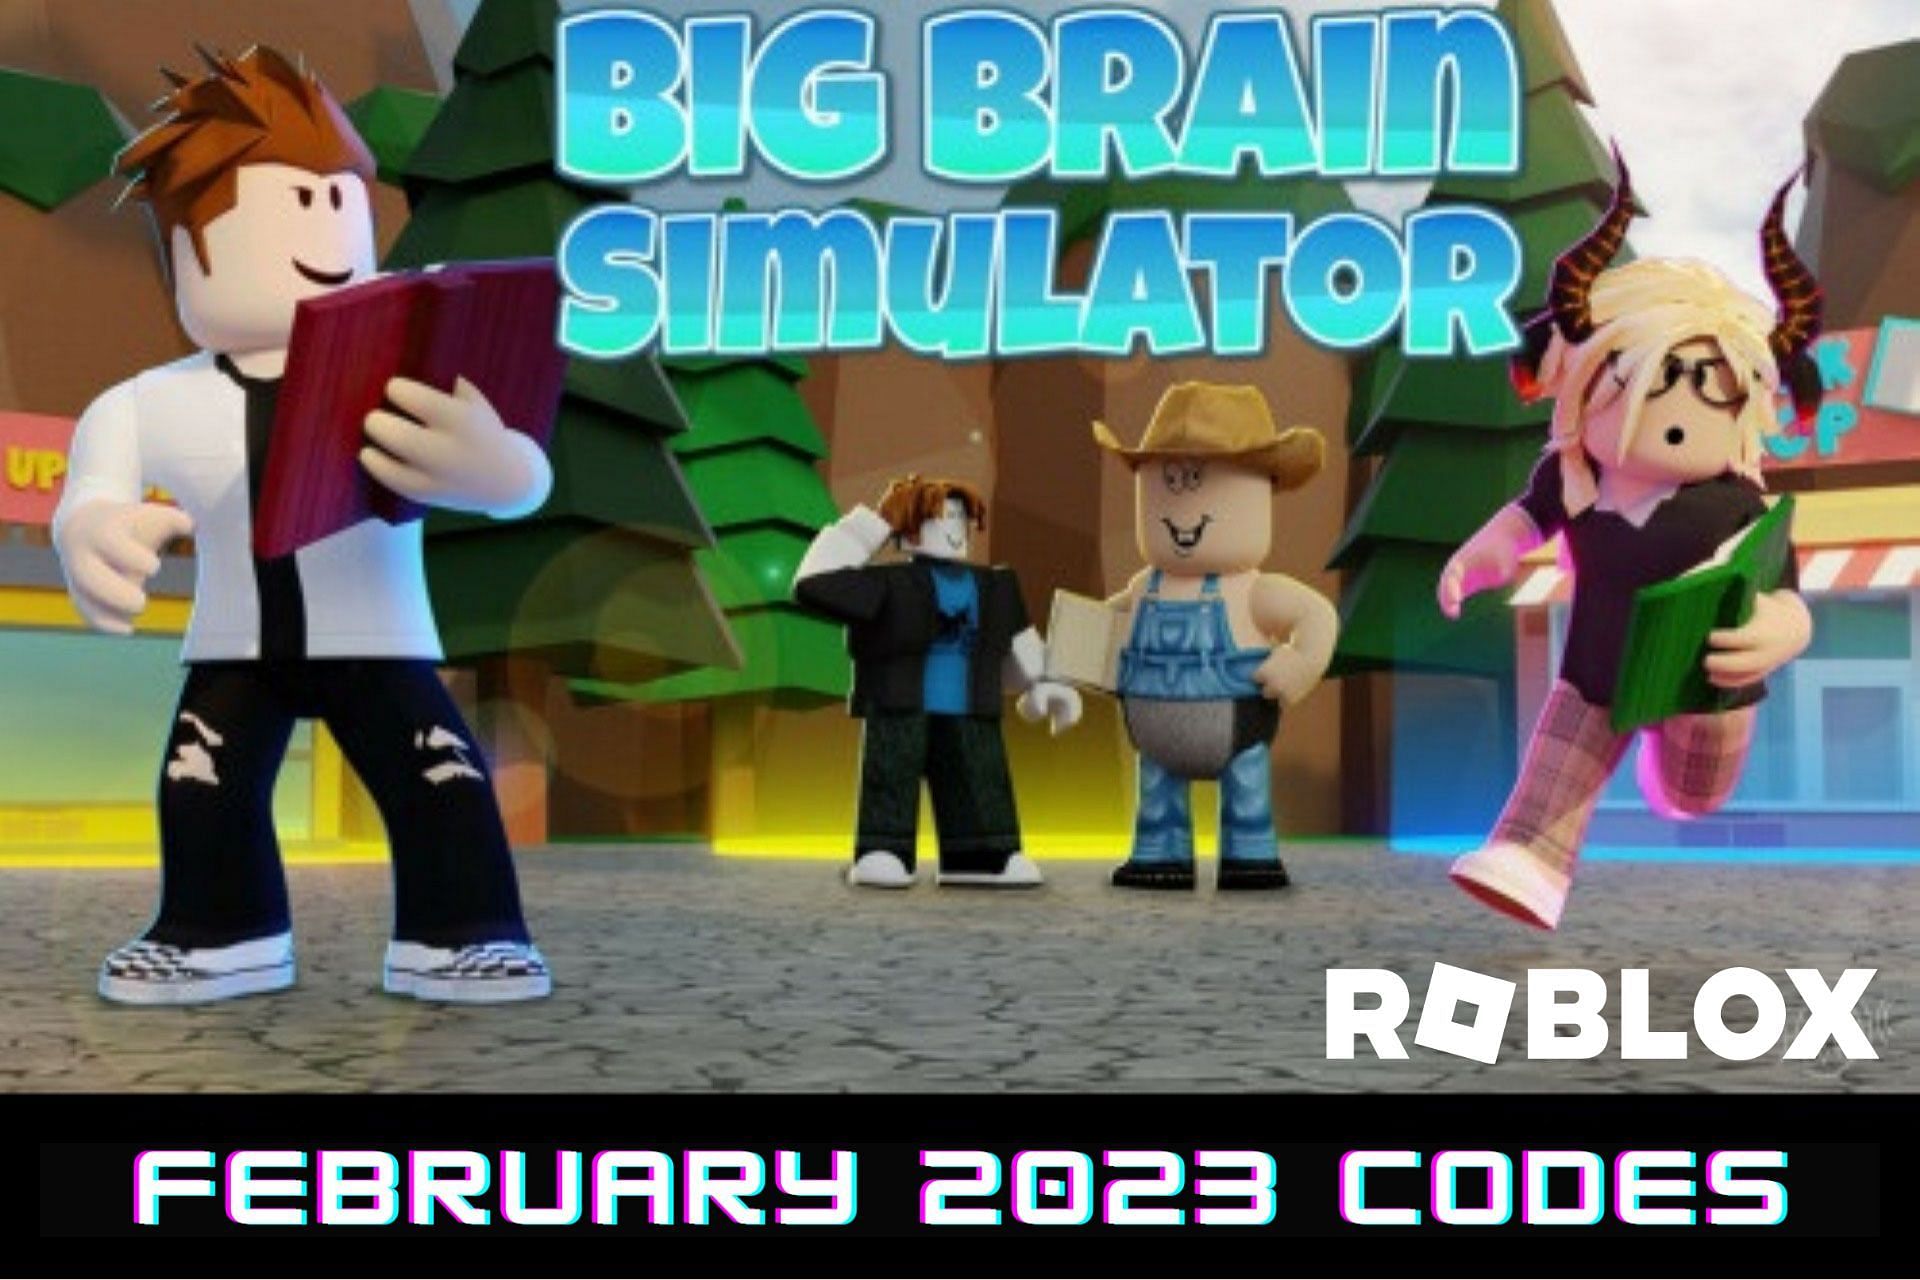 Roblox promo codes April 2020: Latest list of active Roblox codes, Gaming, Entertainment